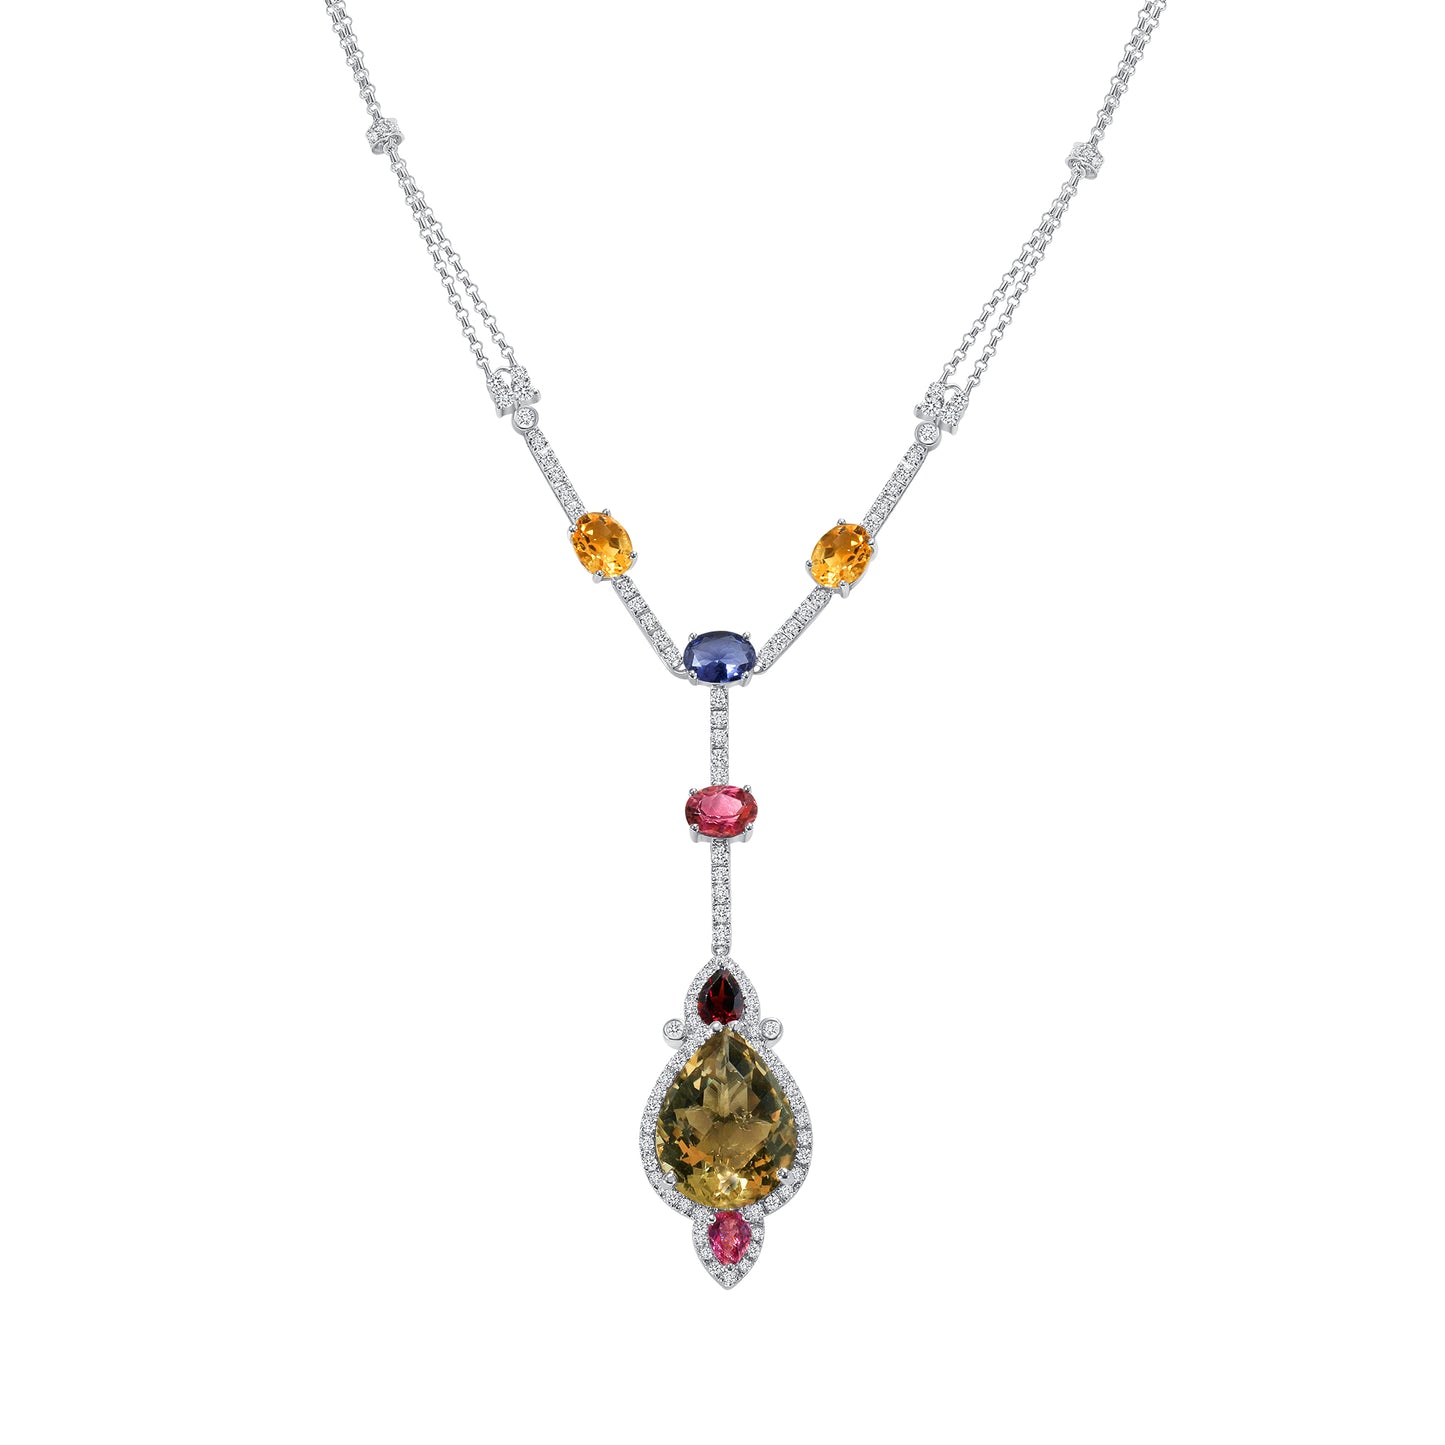 Diamond Necklace With Colored Stone Necklace Combination  V0321